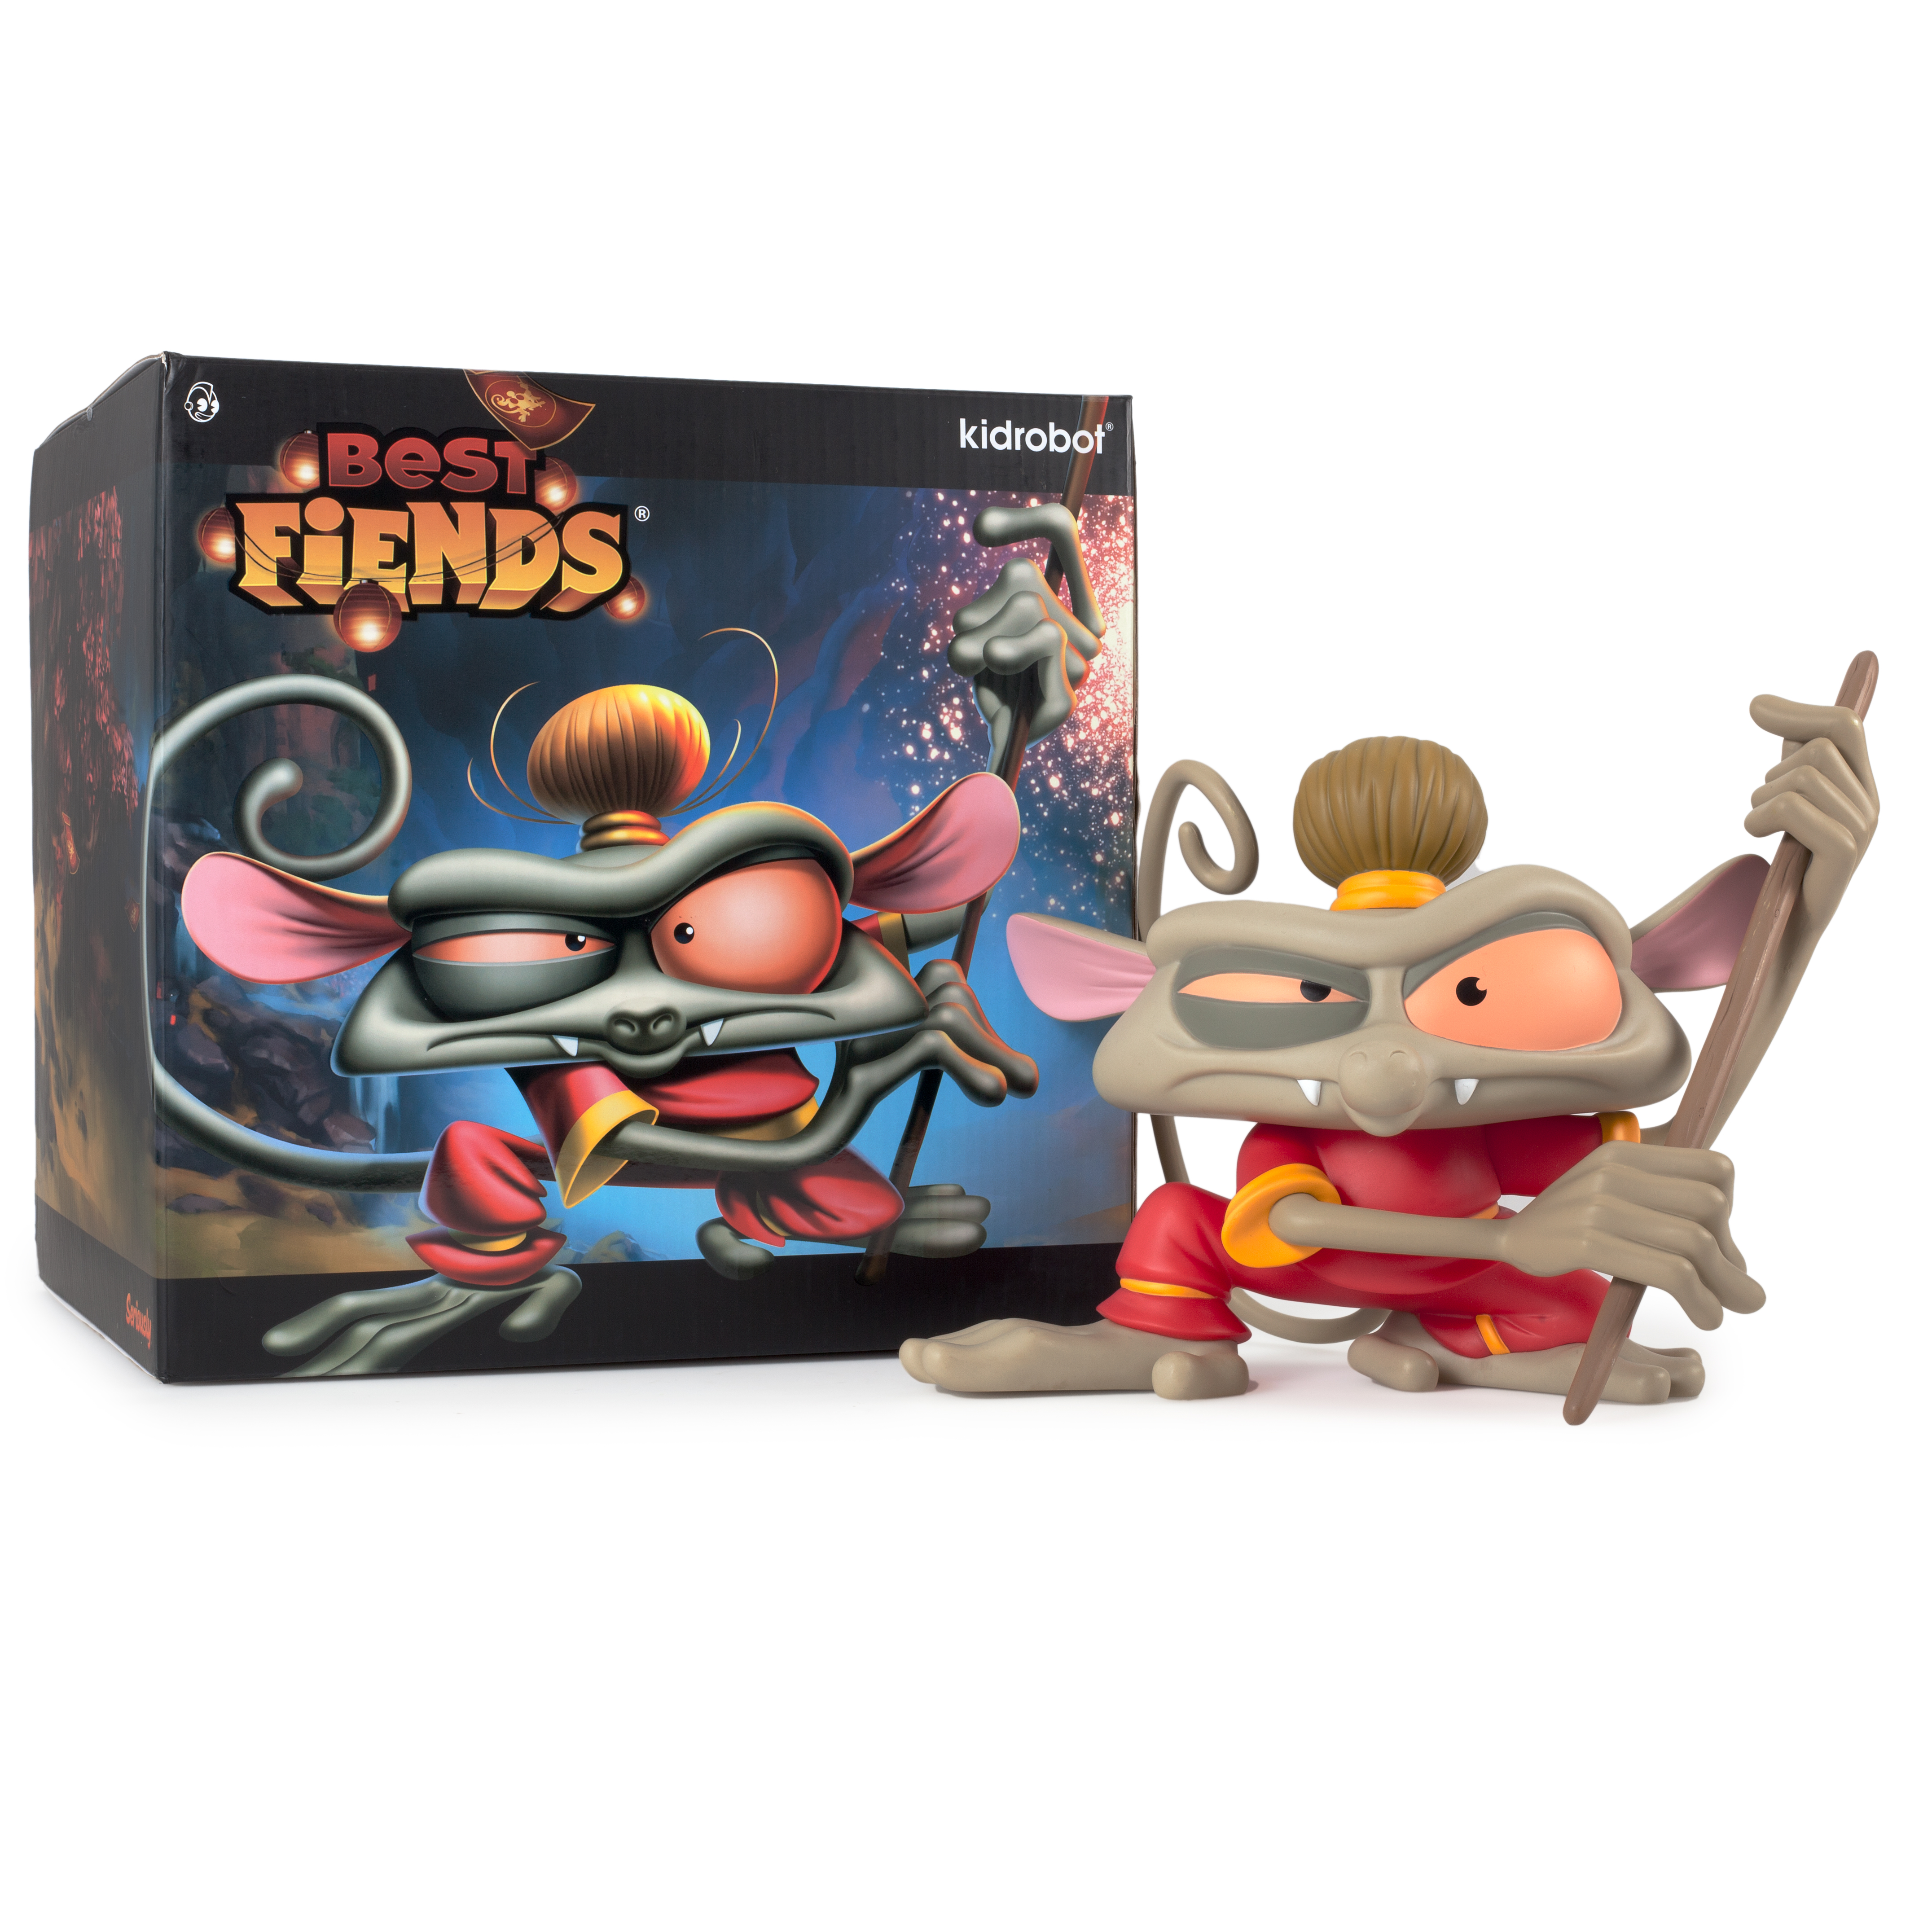 and Seriously to Release New Best Fiends Figure